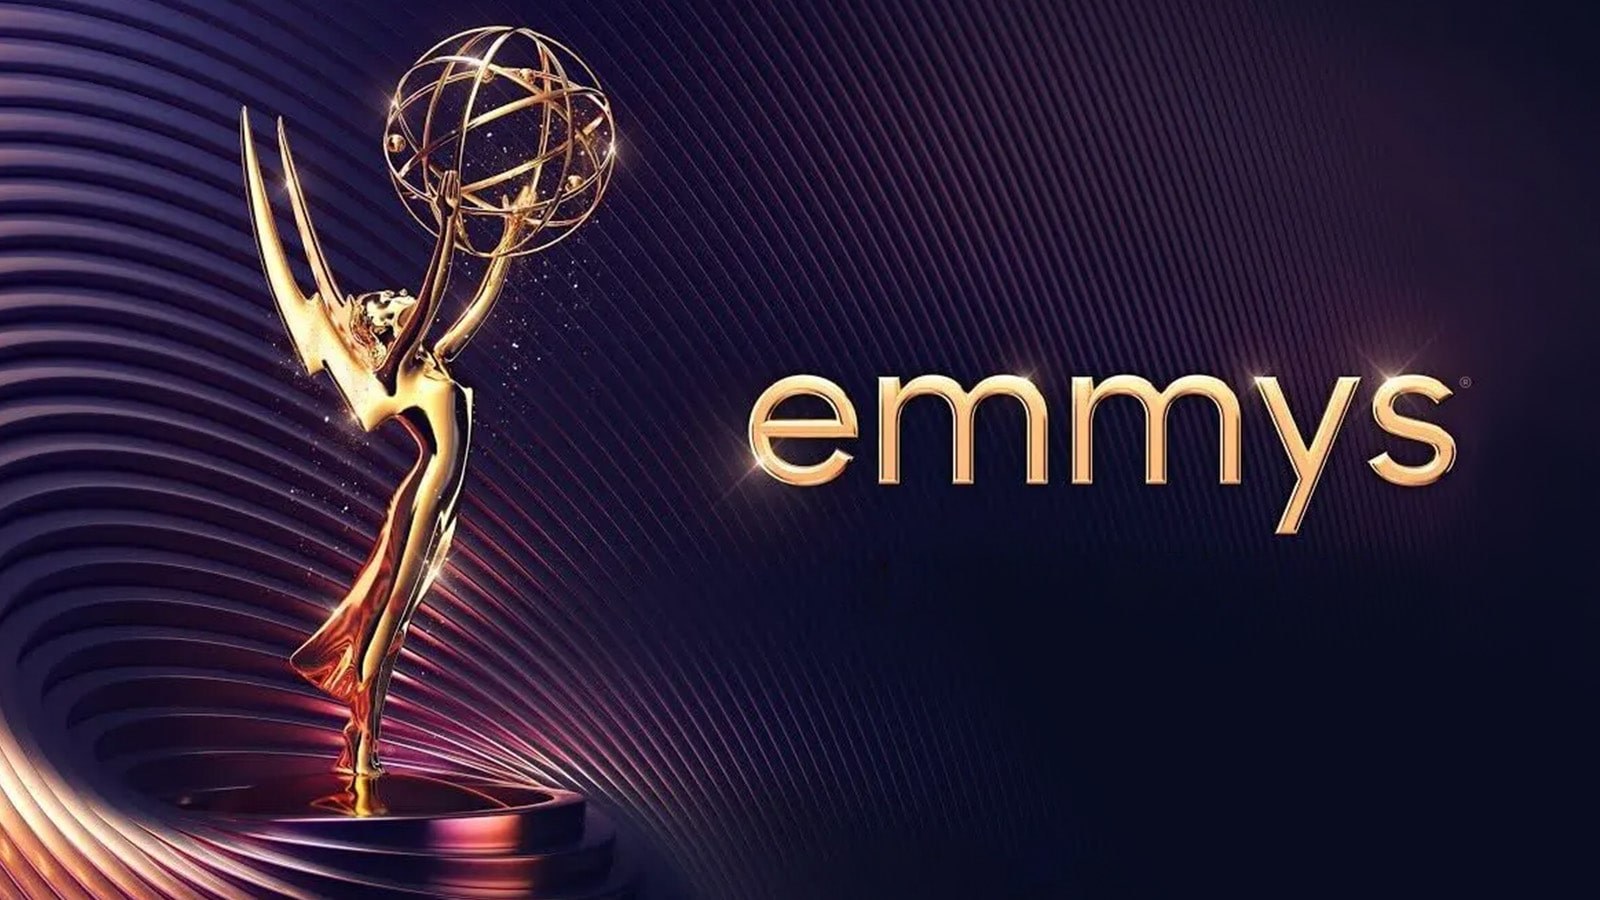 Emmy Award statuette on purple background with word Emmy spelled out.